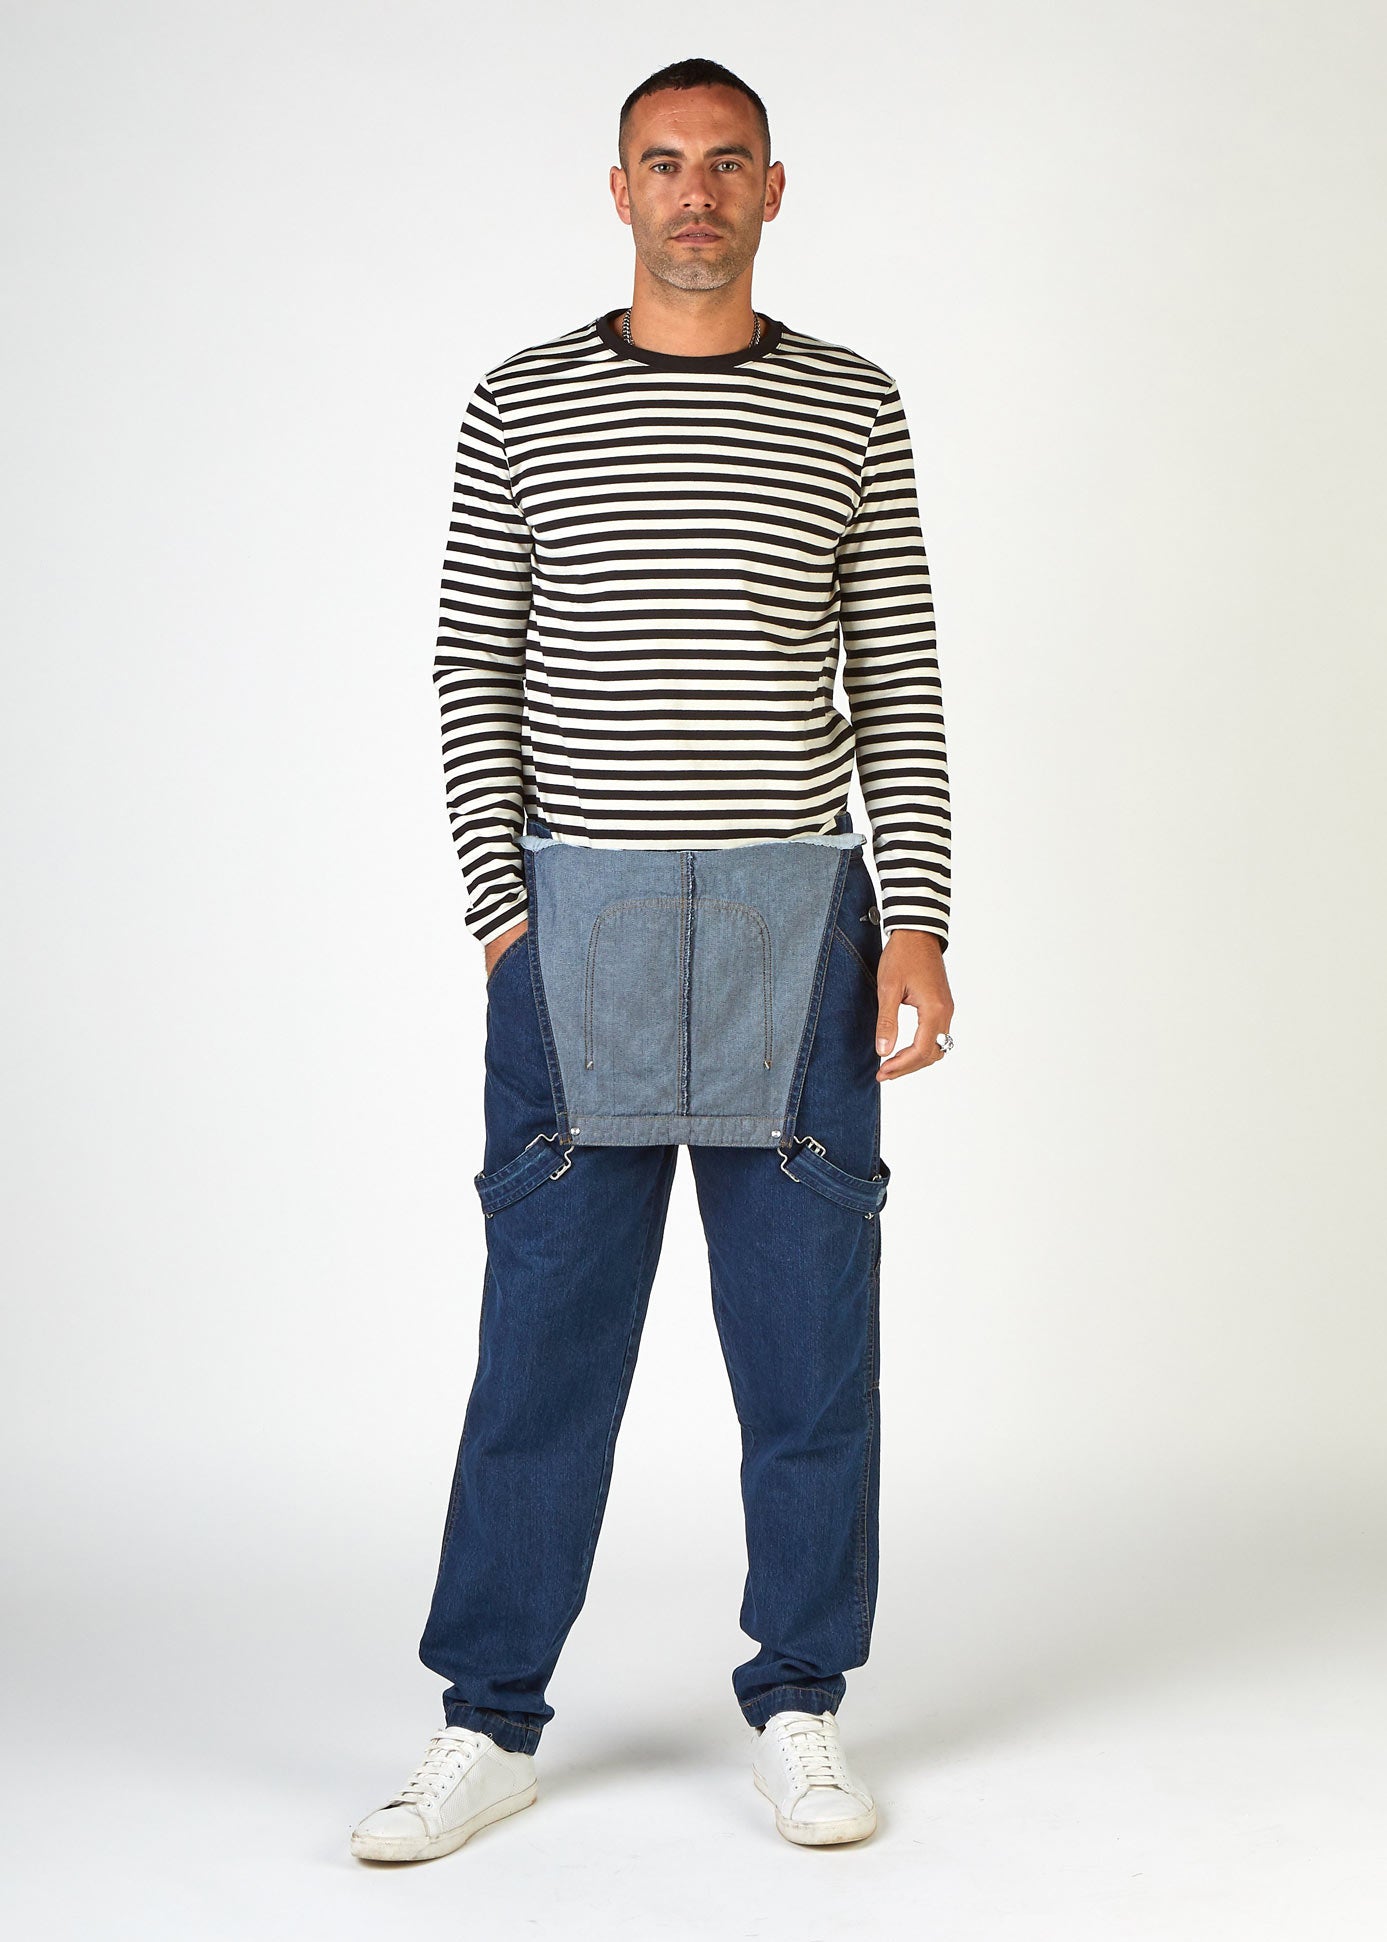 Full-length front bib-down view of loose-fit, indigo bib-overalls from Dungarees Online, revealing Breton-style top.